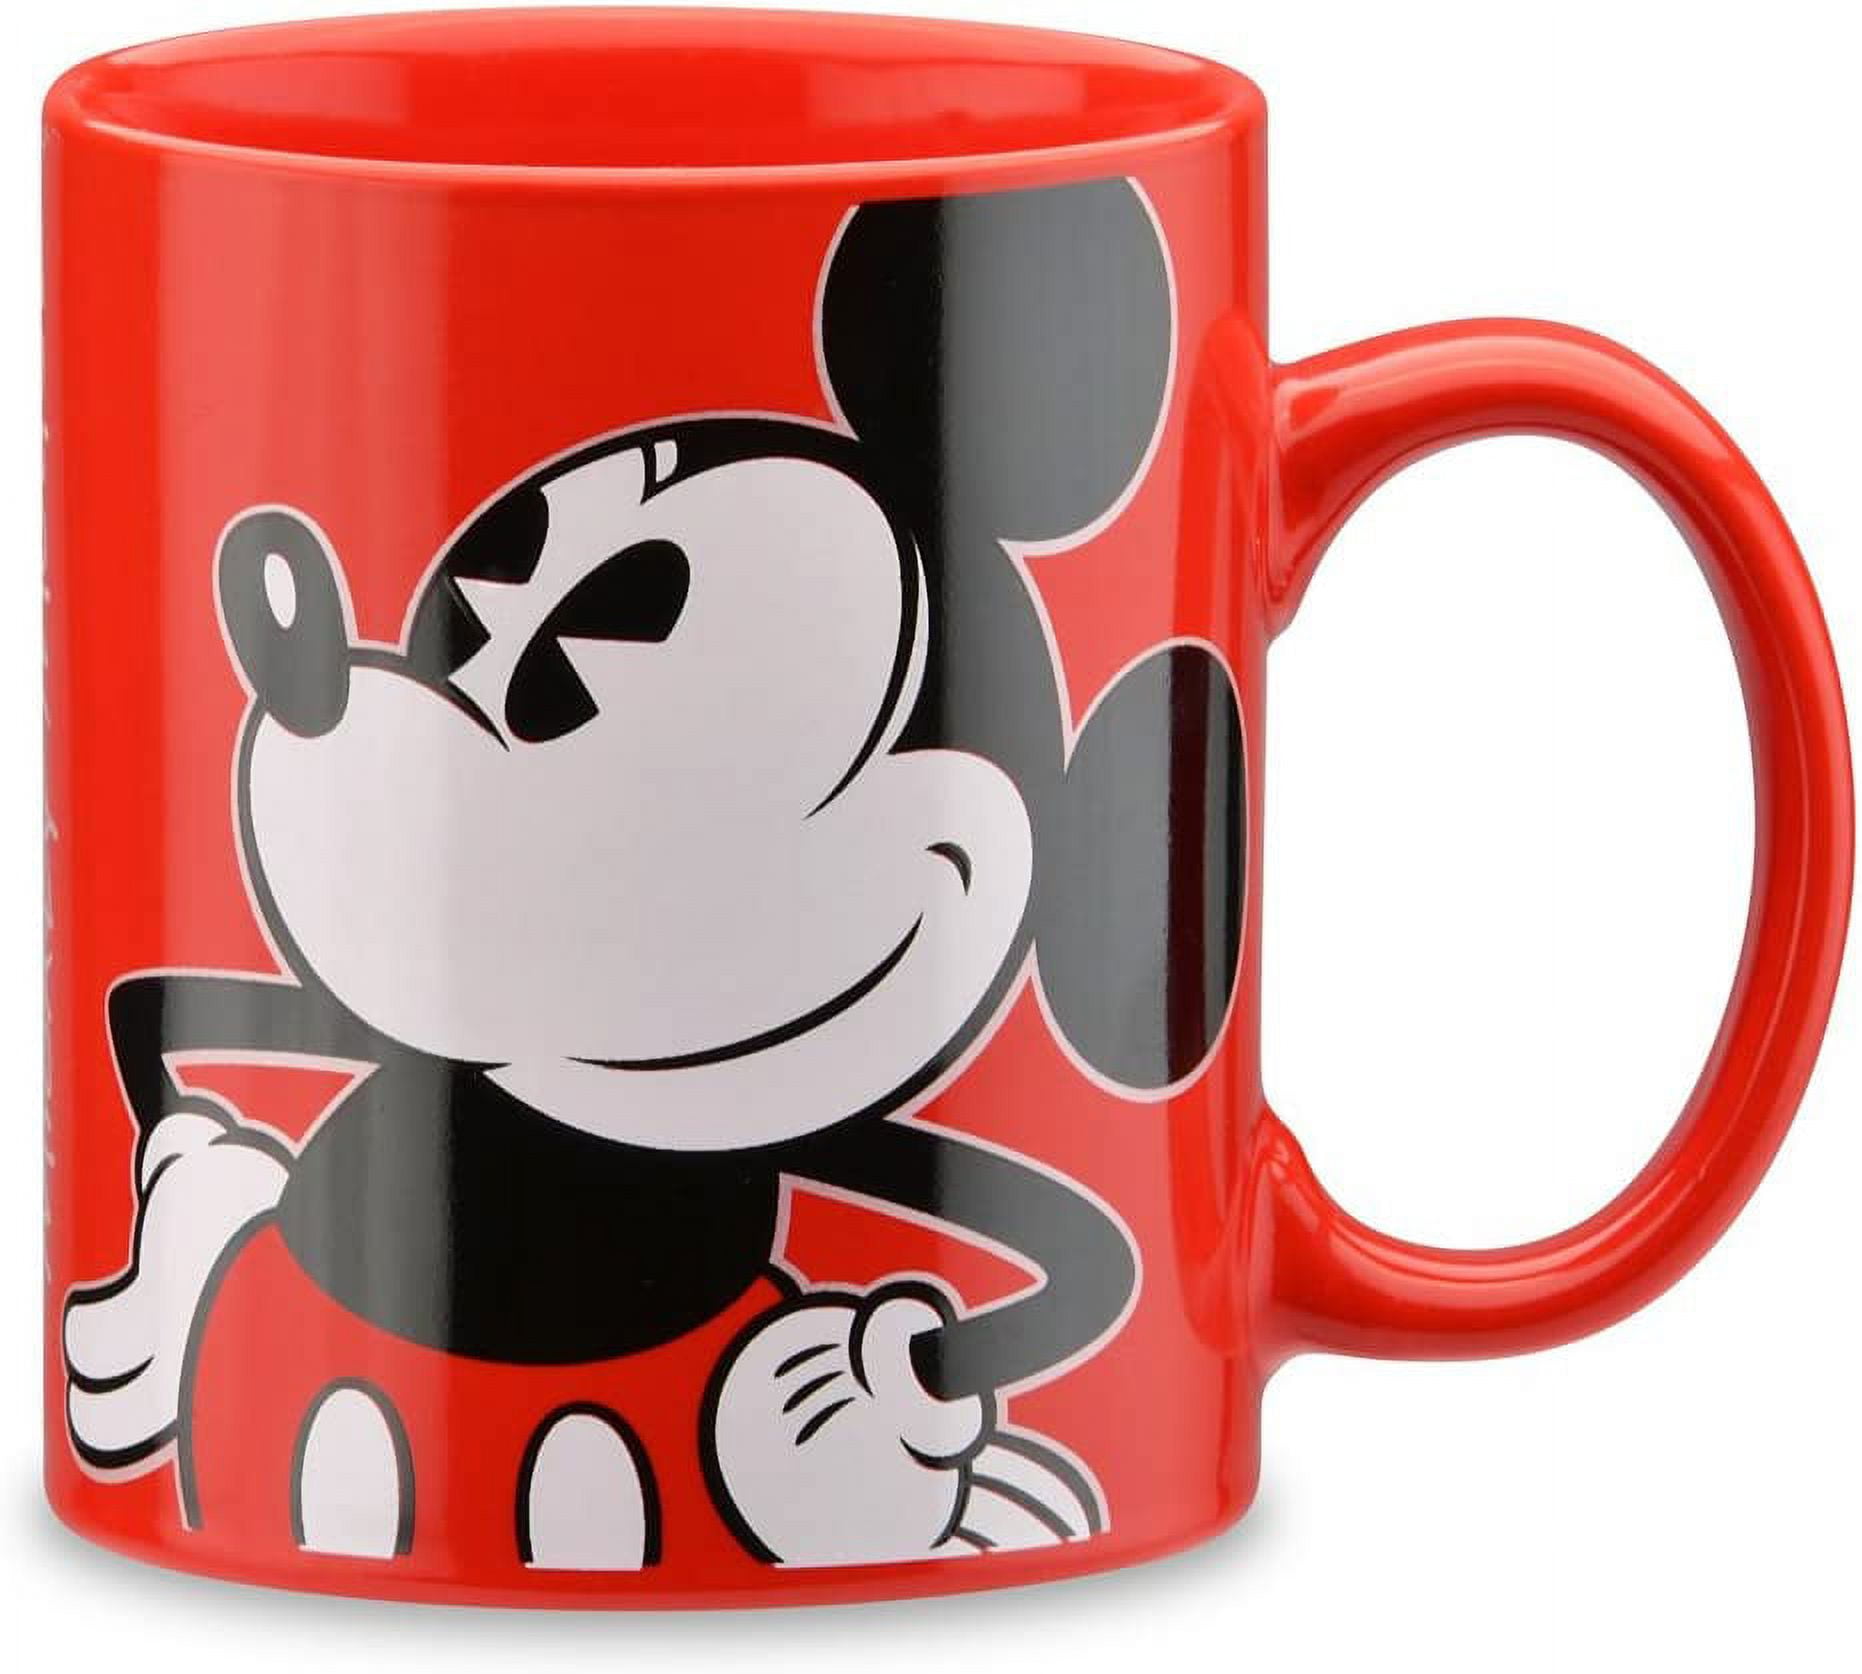 Mickey Mouse Personal Coffee Maker